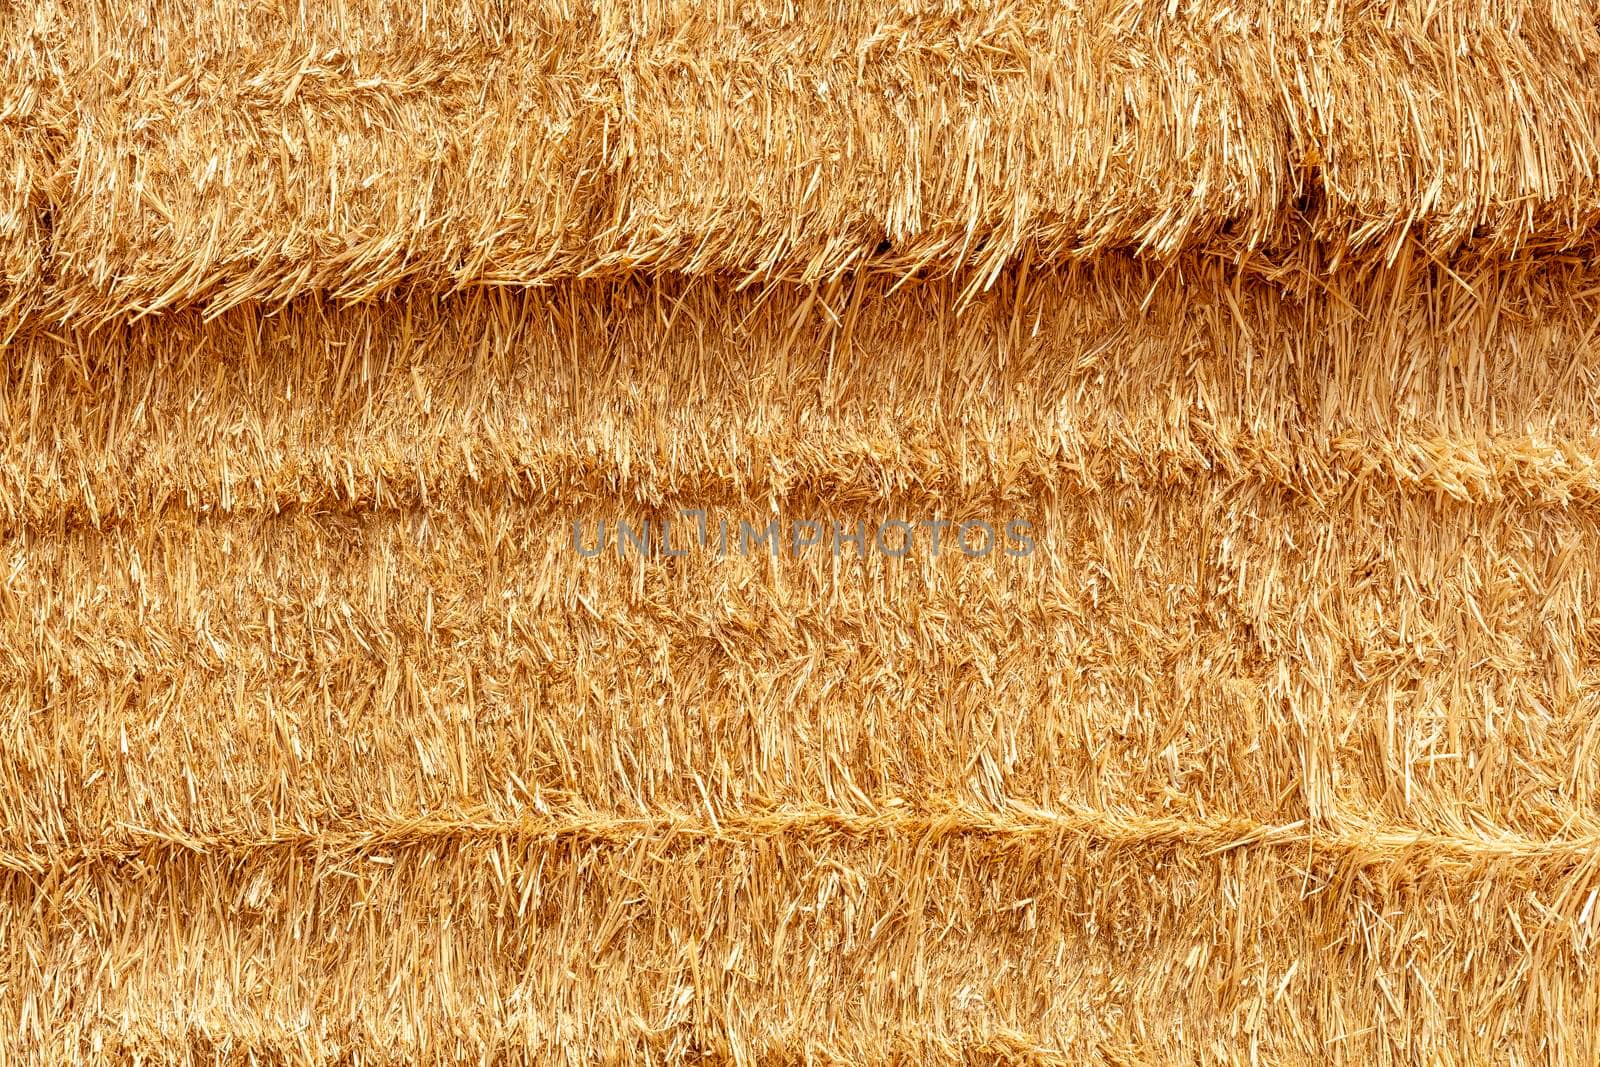 straw of hay in a field background